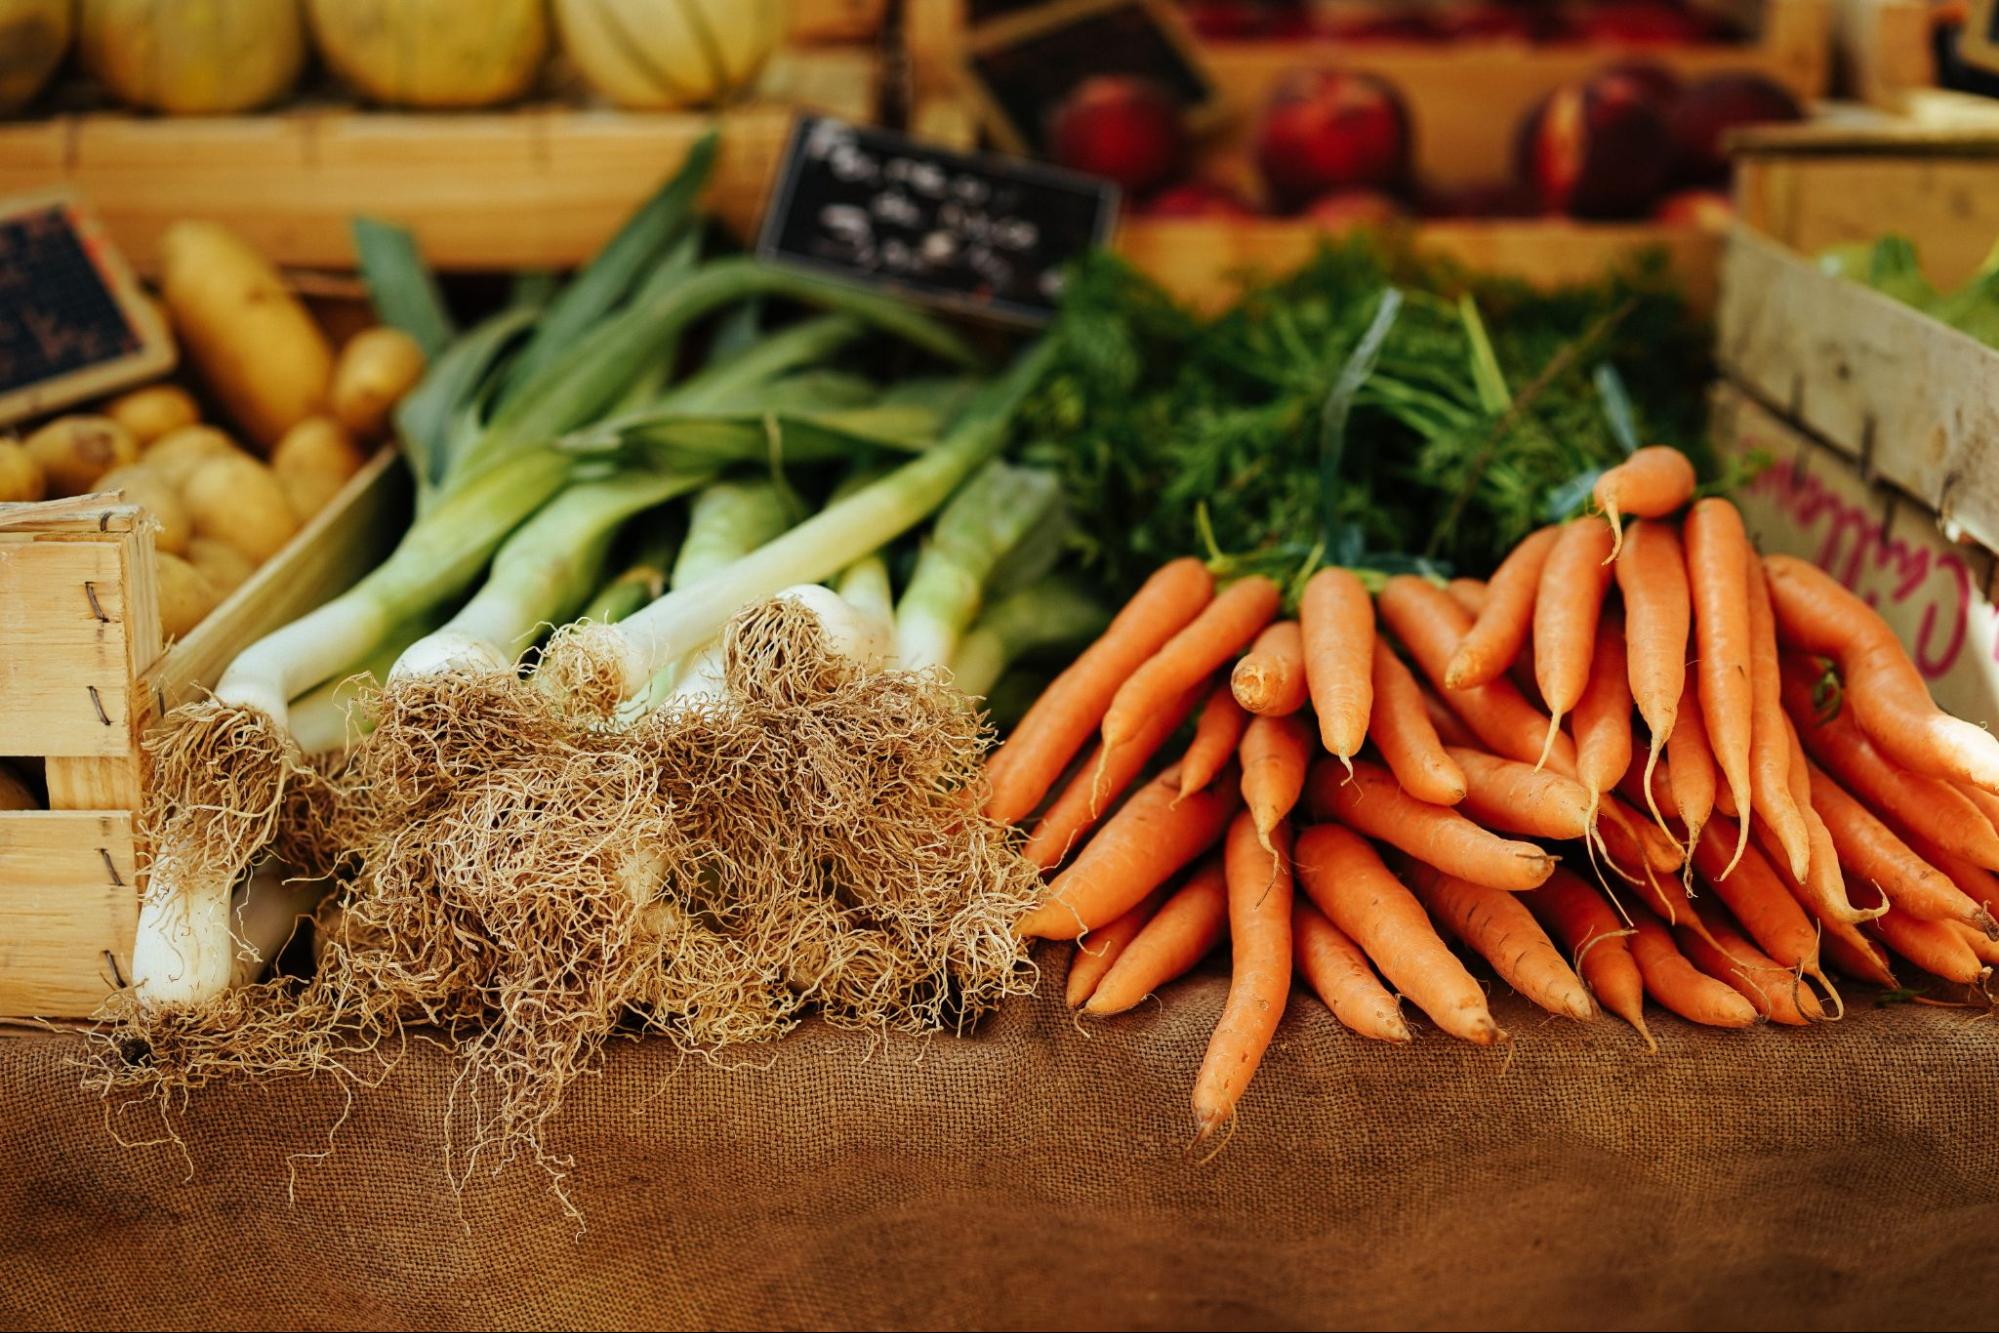 Closeup of a carrot bunch and spring onions on a farm table